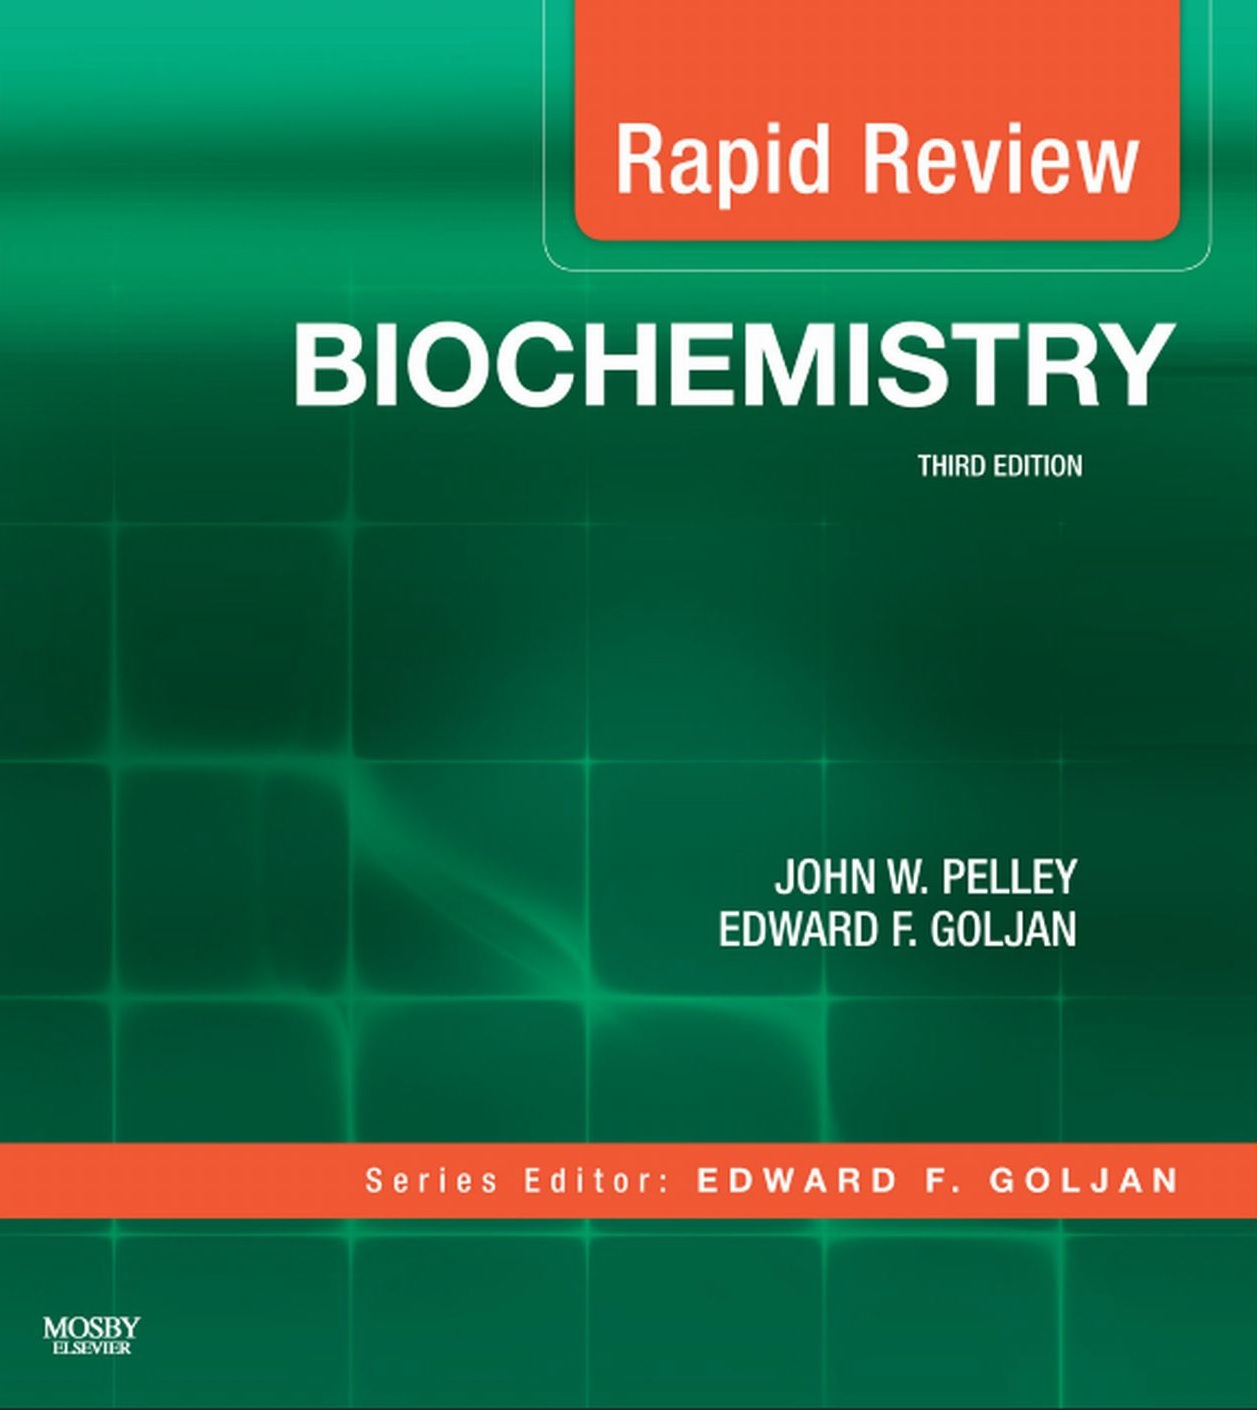 Rapid Review Biochemistry third edition pdf book full download